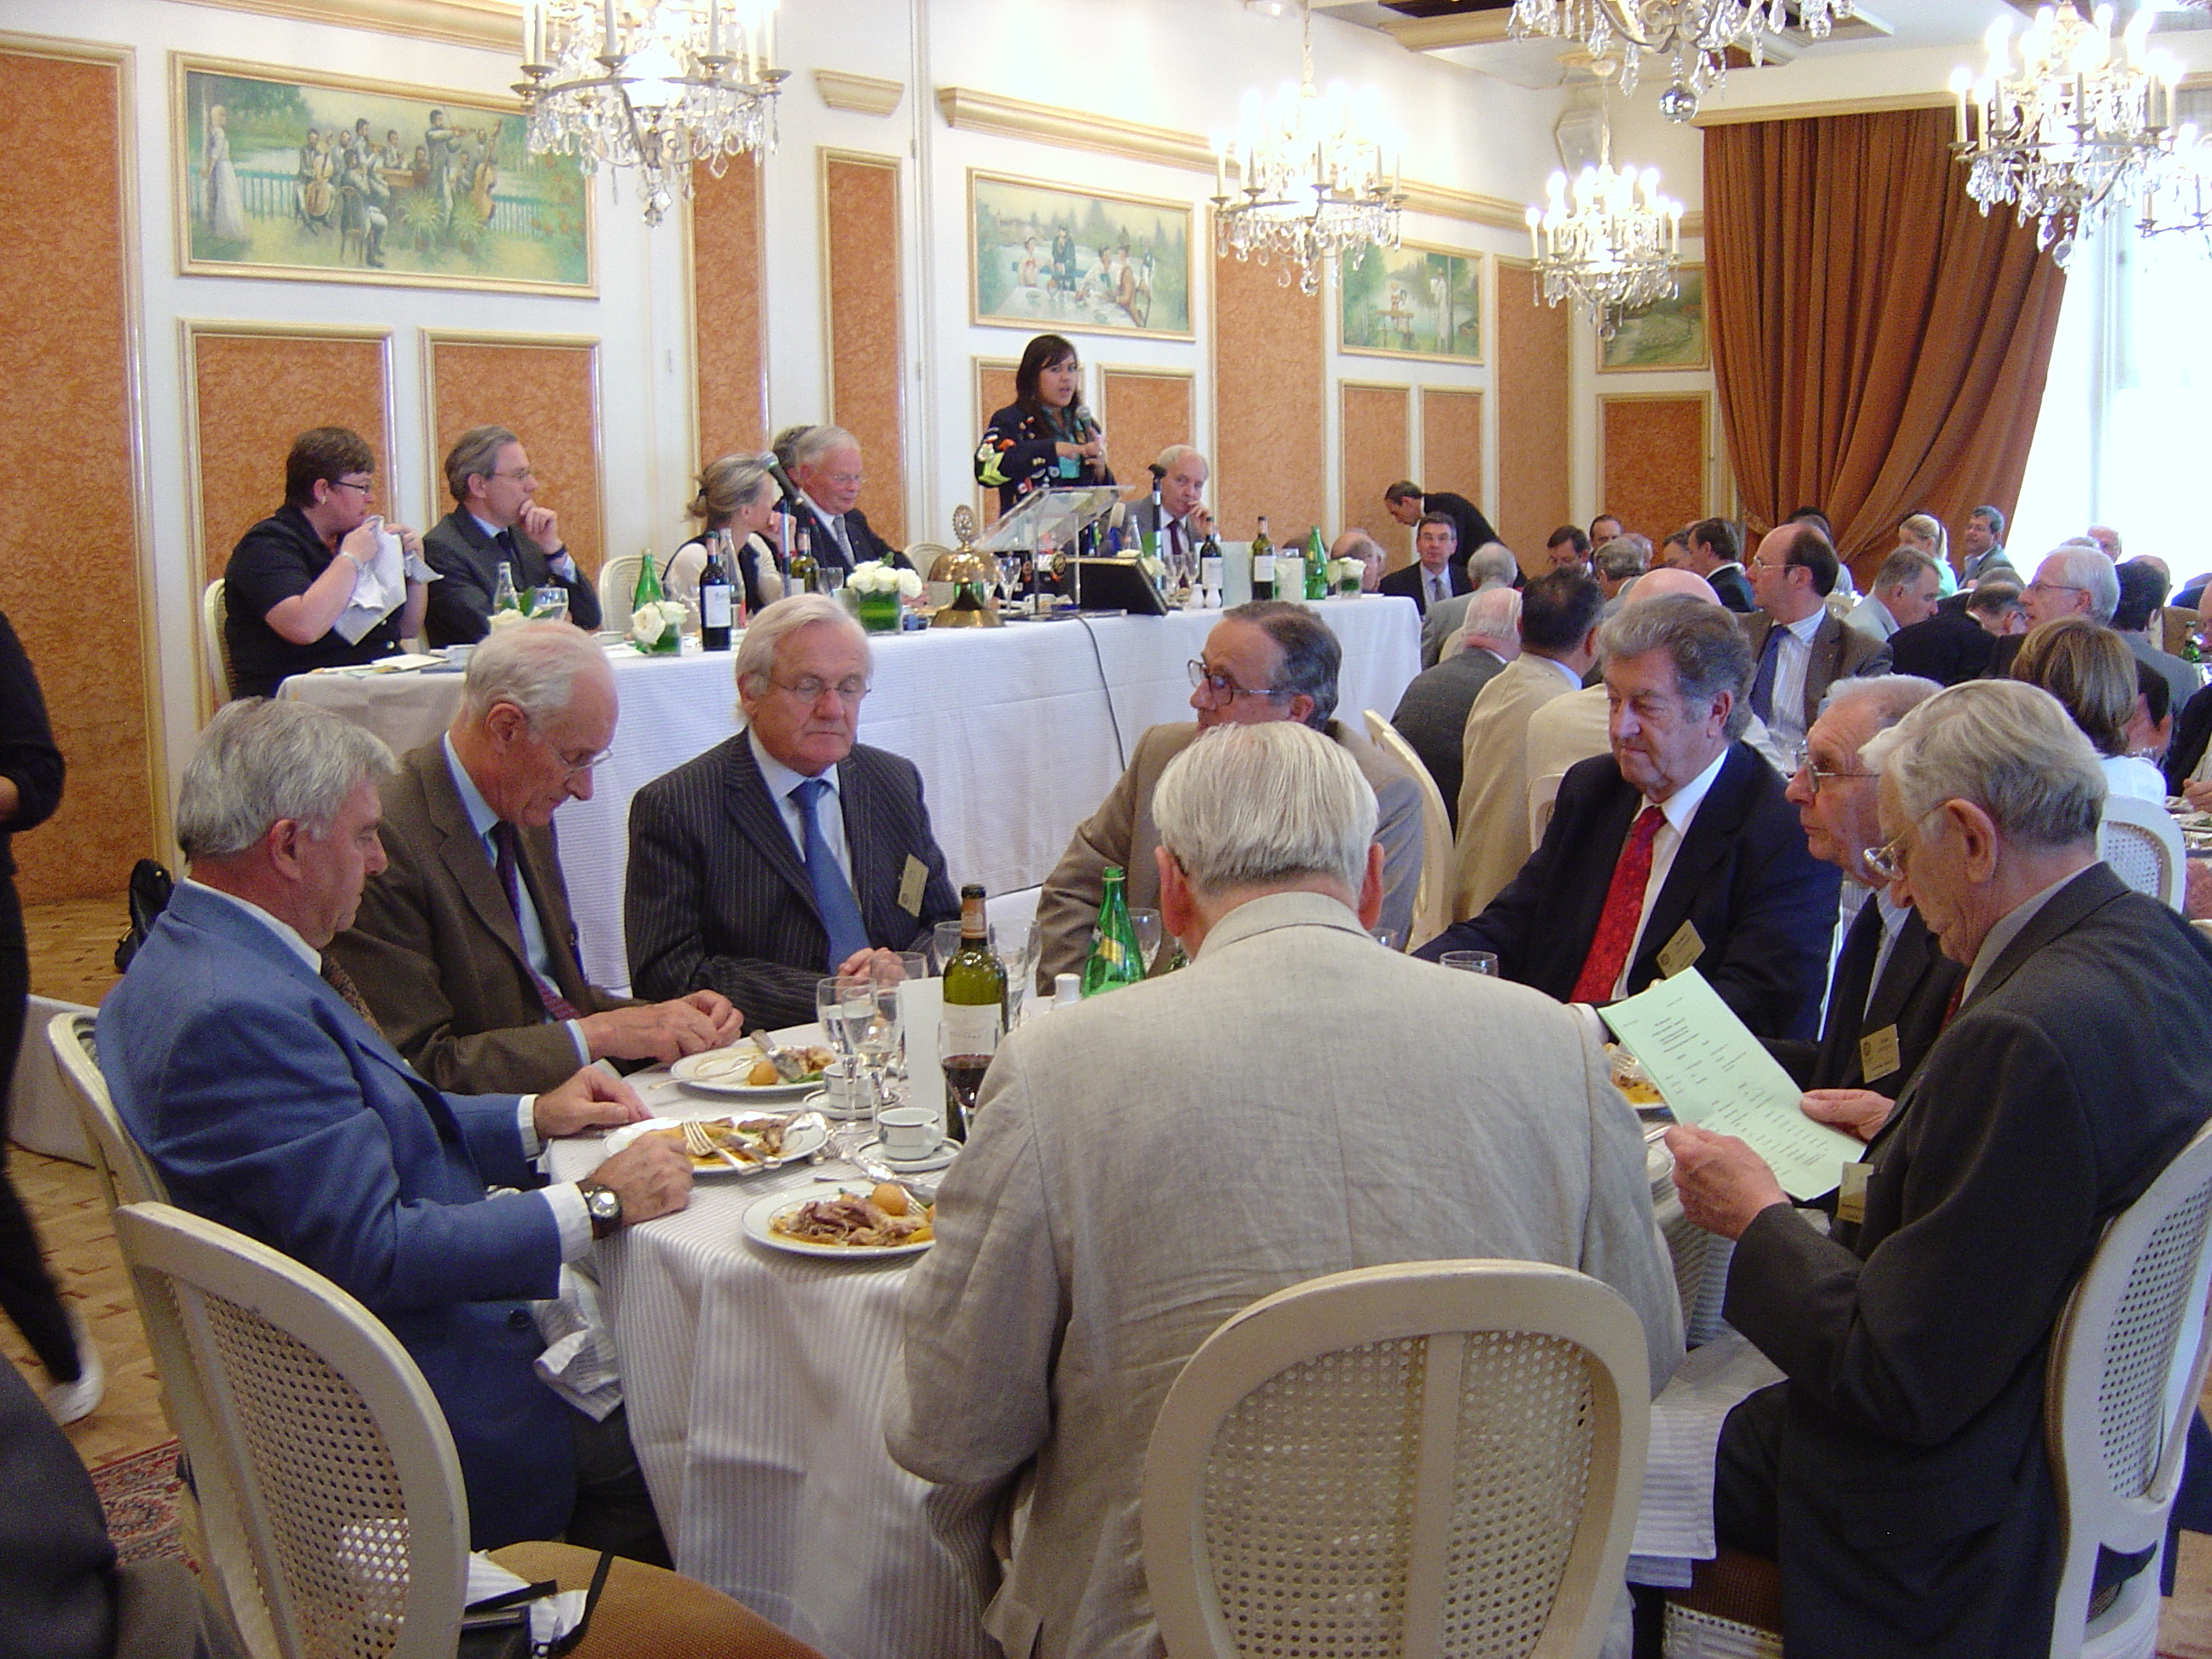 Surviving a formal luncheon with a room full of high-horsepower Parisian business and political leaders.